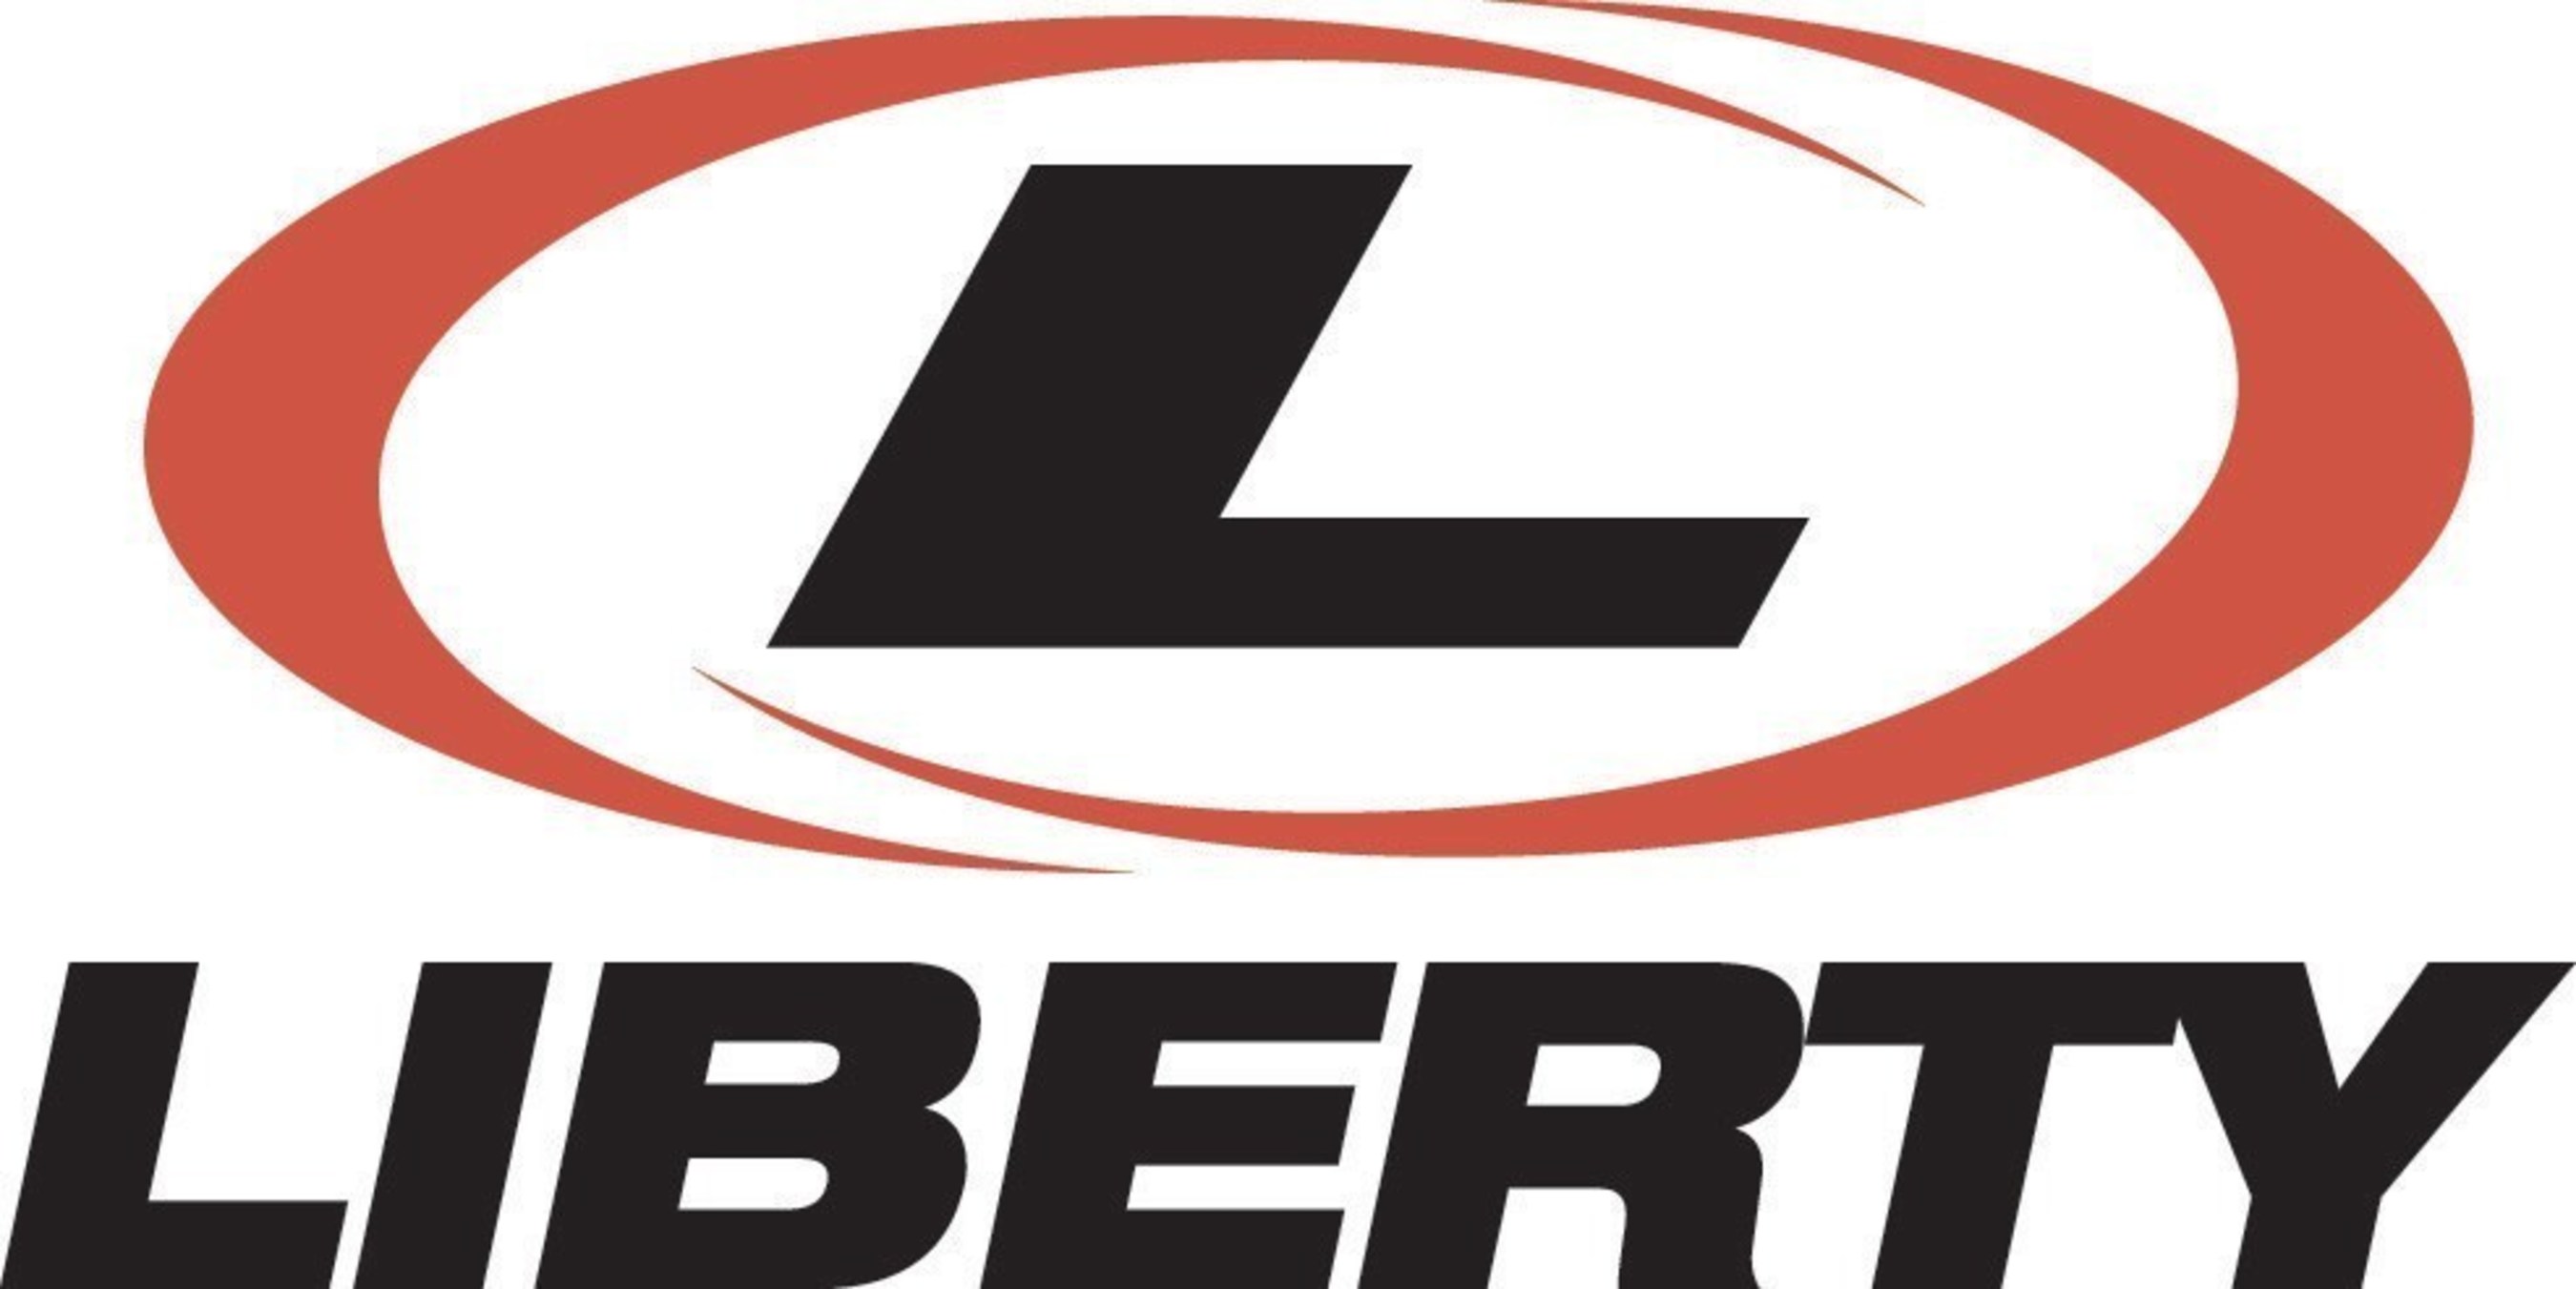 Liberty Oilfield Services